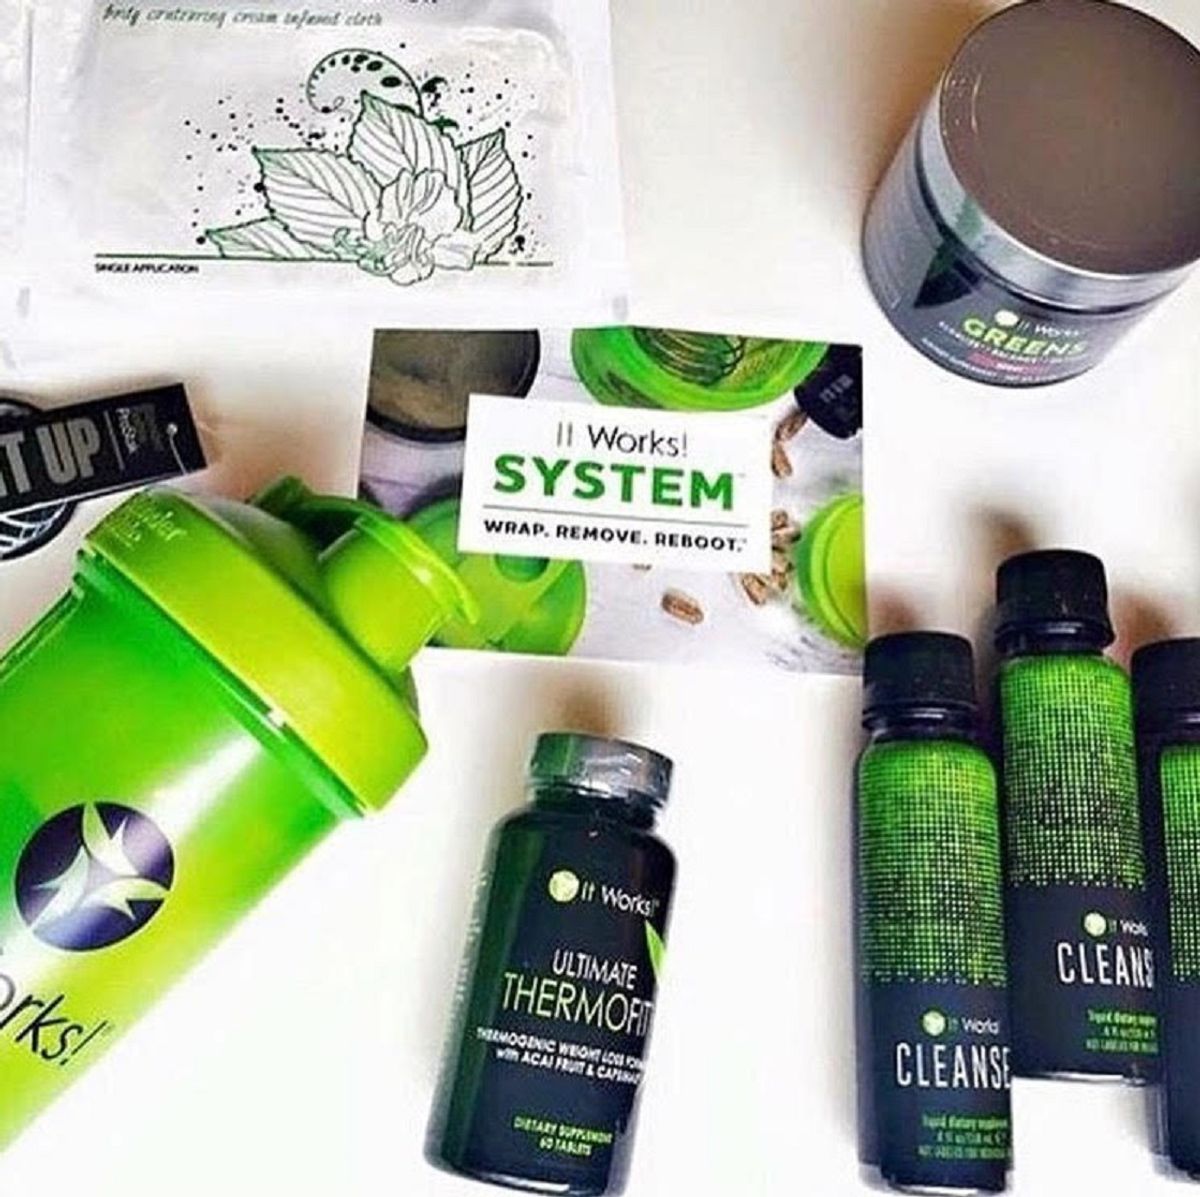 An Honest Review Of ItWorks! From Someone Who Doesn't Sell The Products